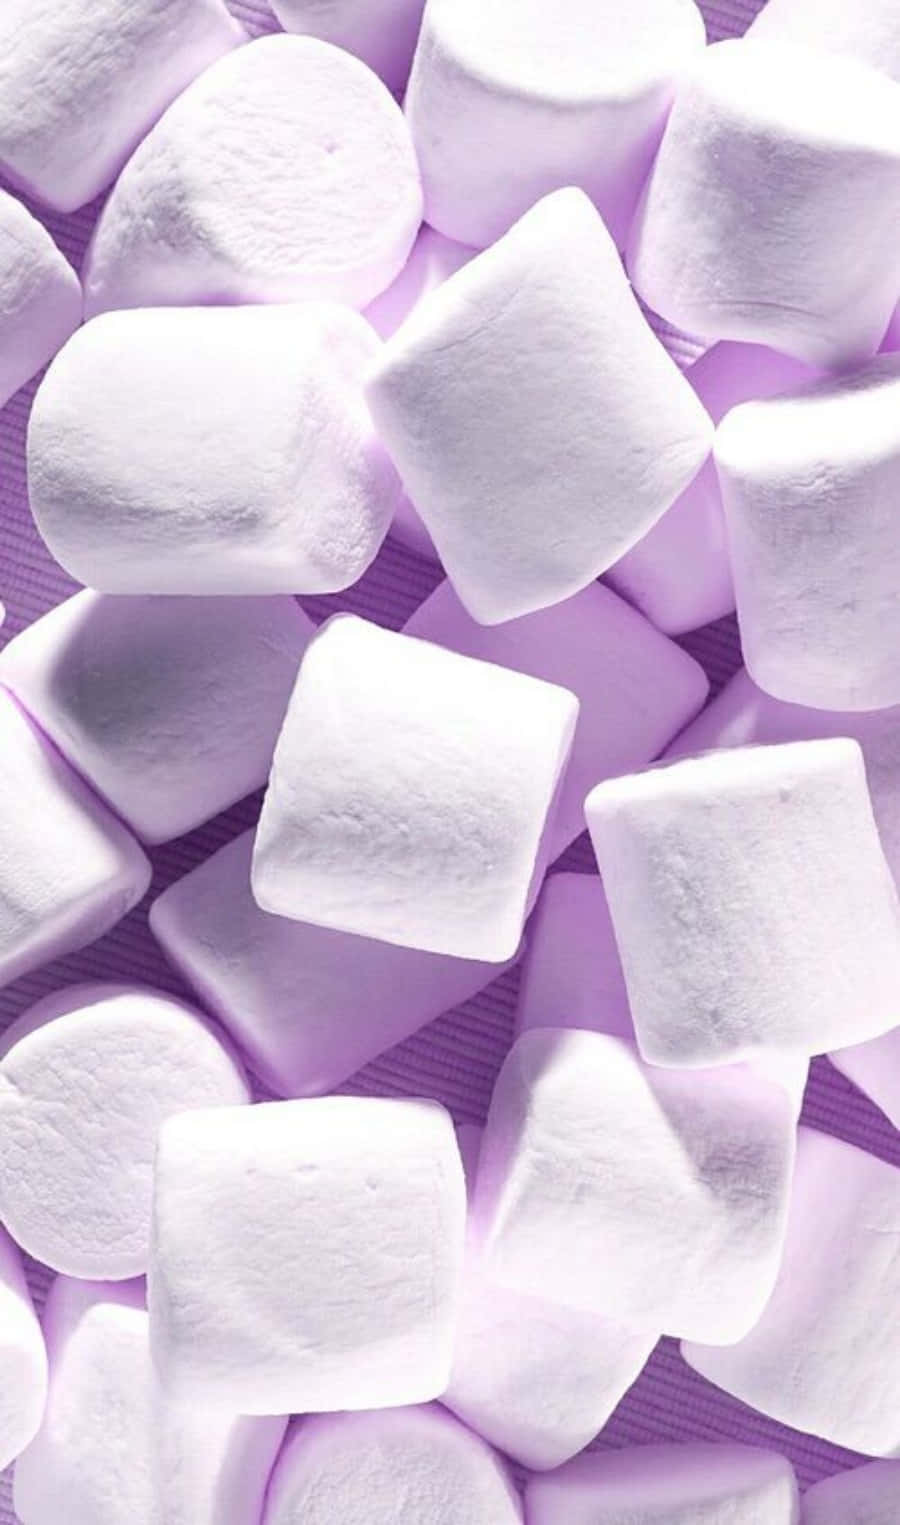 A Pile Of White Marshmallows On A Purple Background